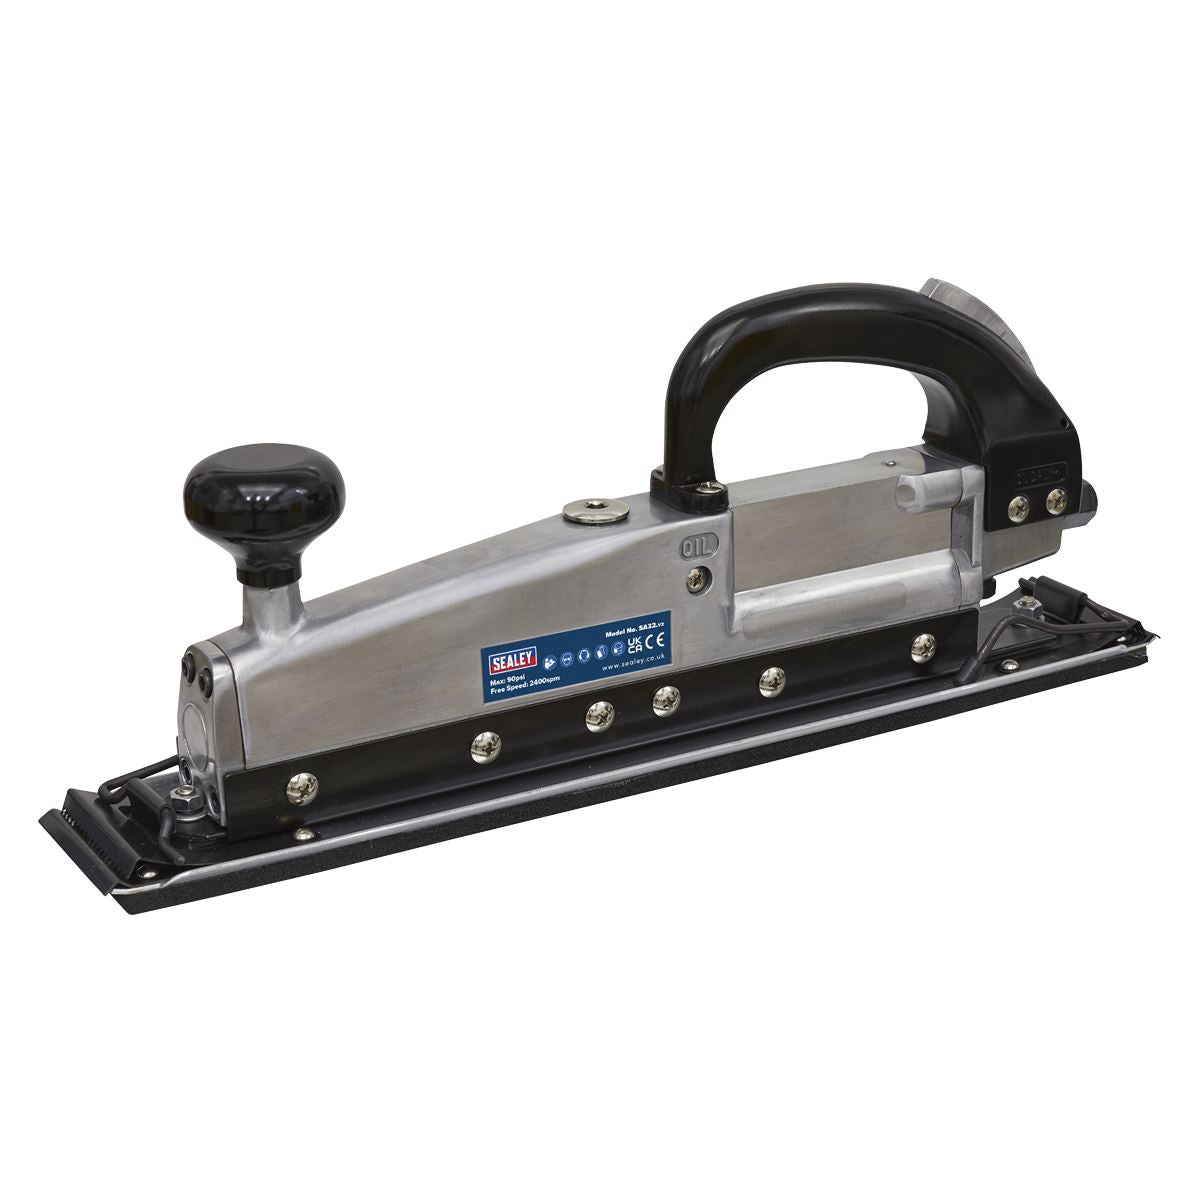 Sealey Air Long Bed Sander 400 x 70mm Twin Piston In-line